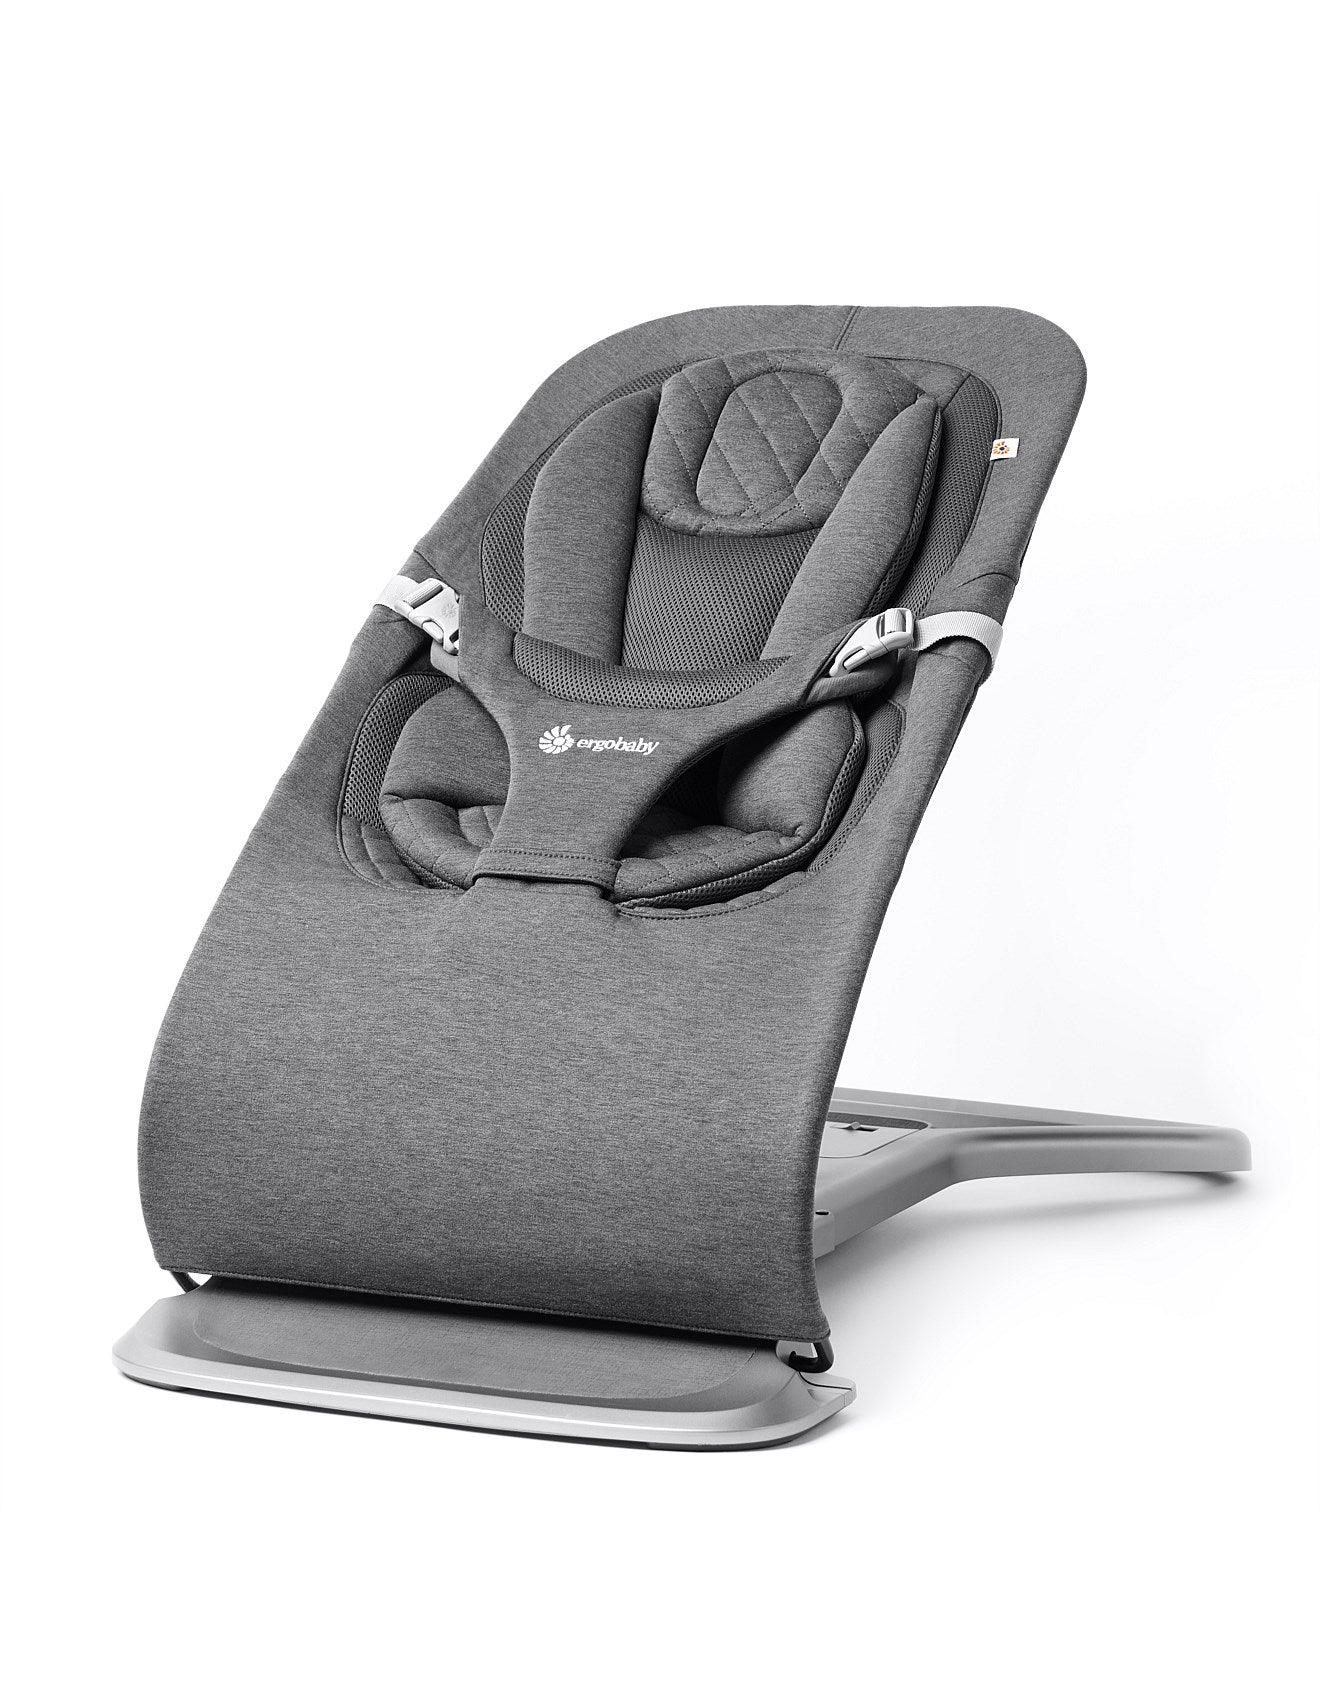 Ergobaby Evolve 3 in 1 Bouncer-Charcoal GREY